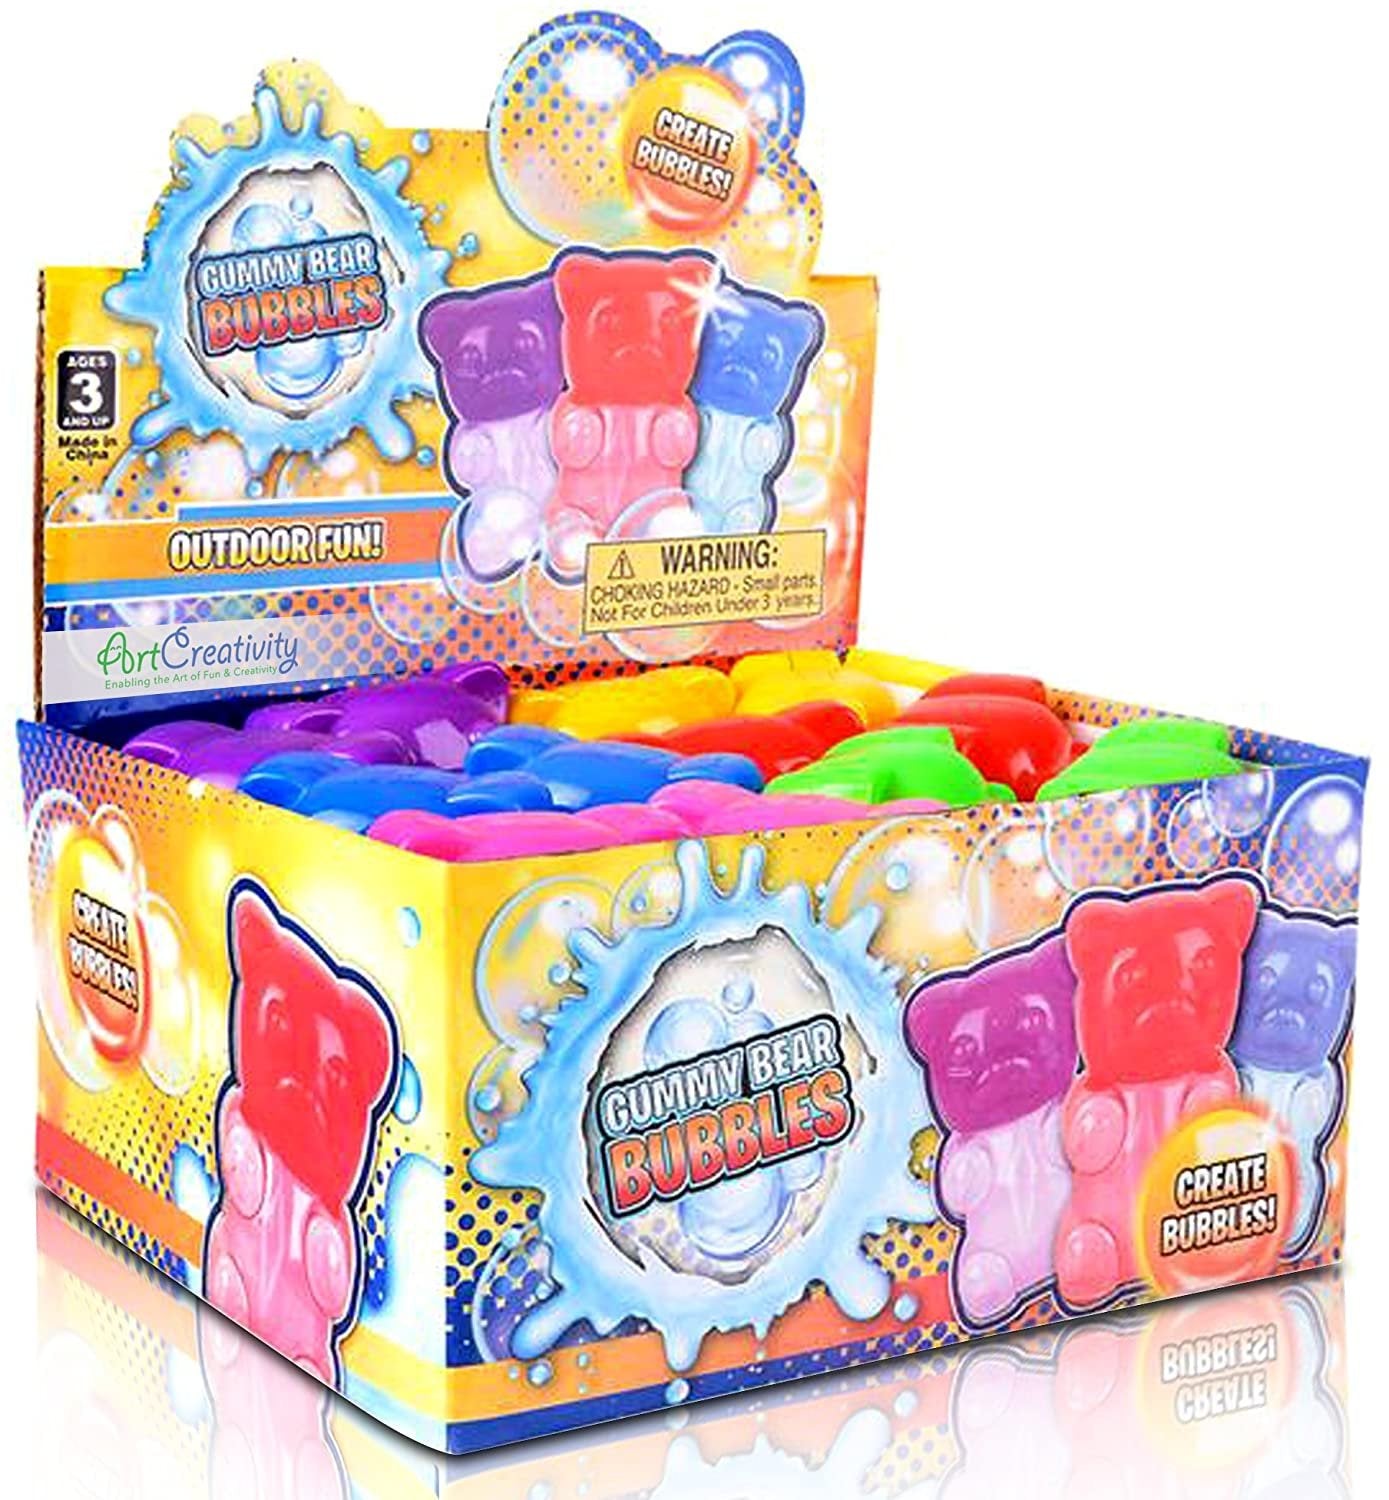 ArtCreativity Gummy Bear Bubble Blowing Wands for Kids - Set of 12 - 3.5 Inch Cute and Colorful Bubbles Blower Toys - Bubble Fluid Included - Great Birthday Party Favors Gift Idea for Boys and Girls